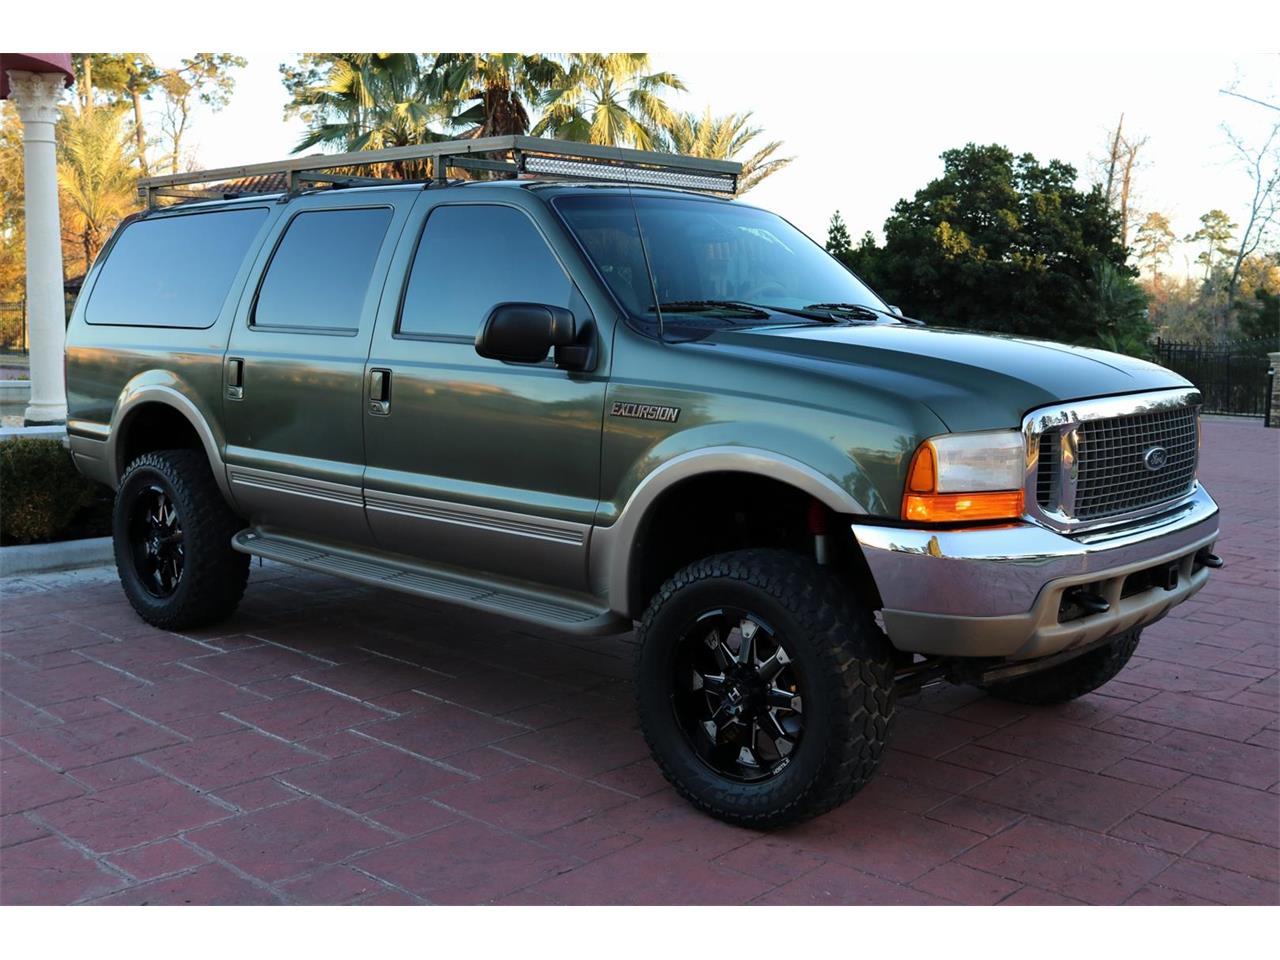 ford excursion for sale in ct